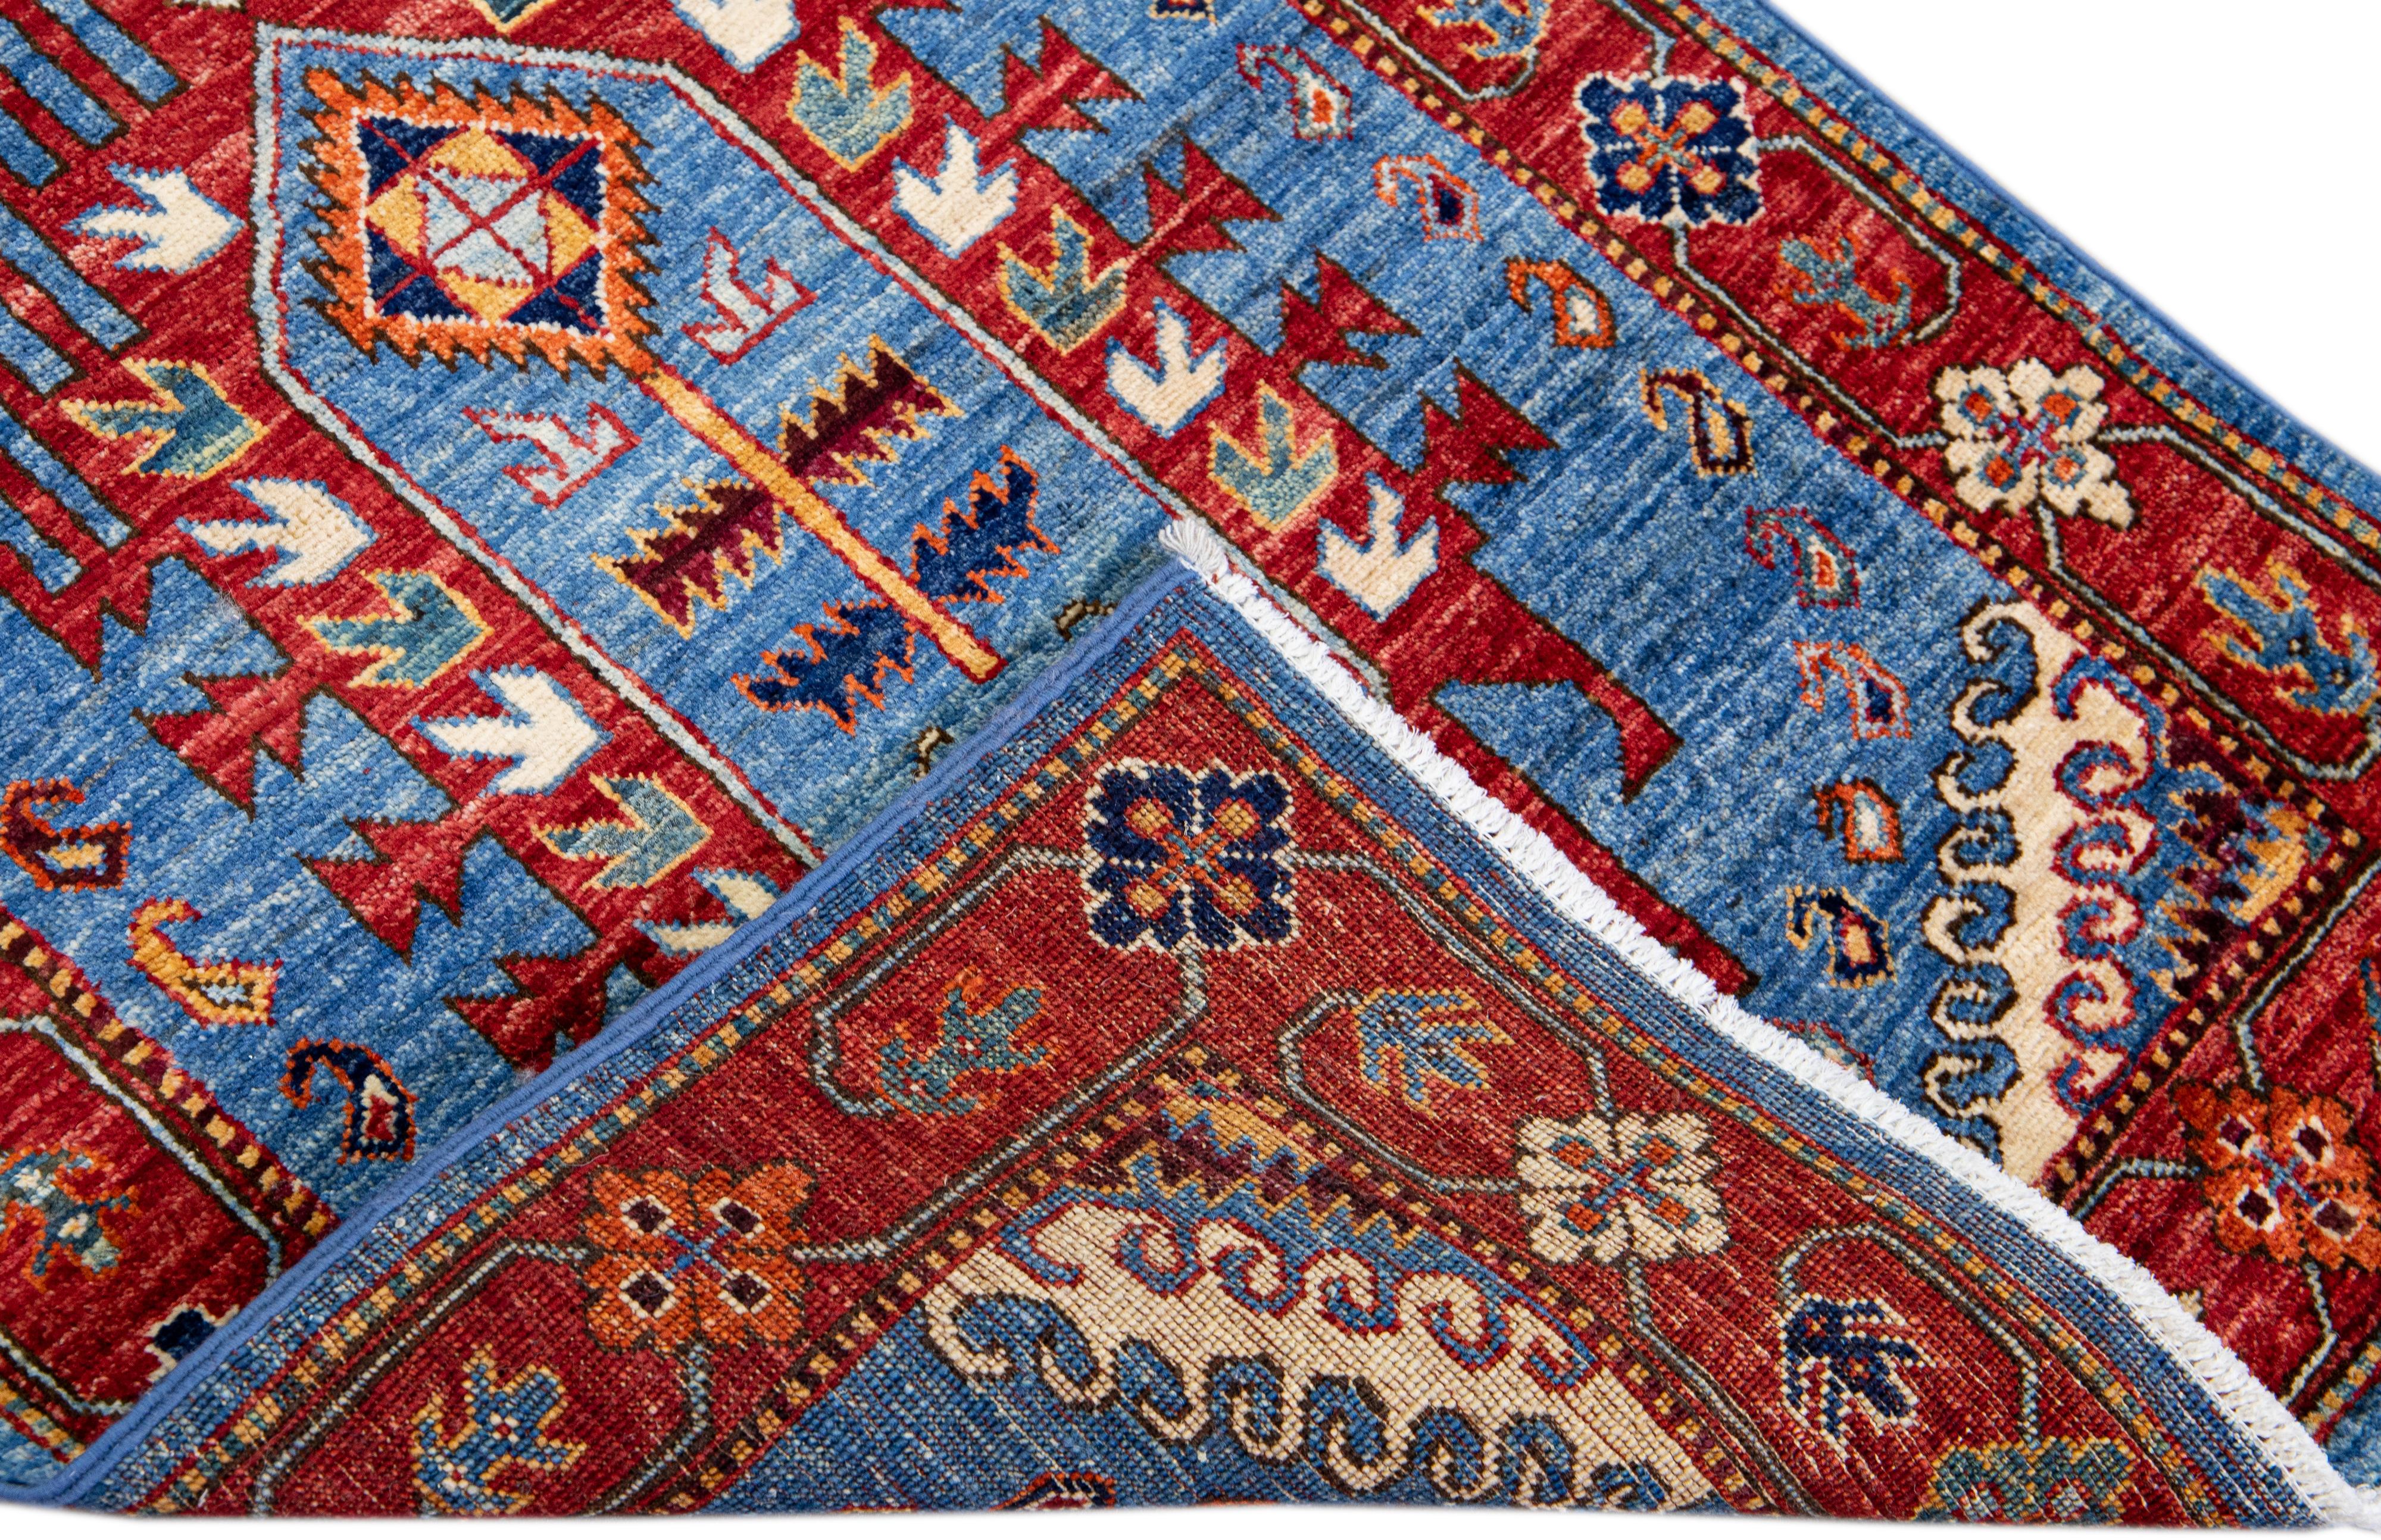 Beautiful antique Serapi style hand-knotted wool runner with a blue field. This piece has a red-designed frame and an all-over gorgeous floral design with multicolor accents.

This rug measures 2'8